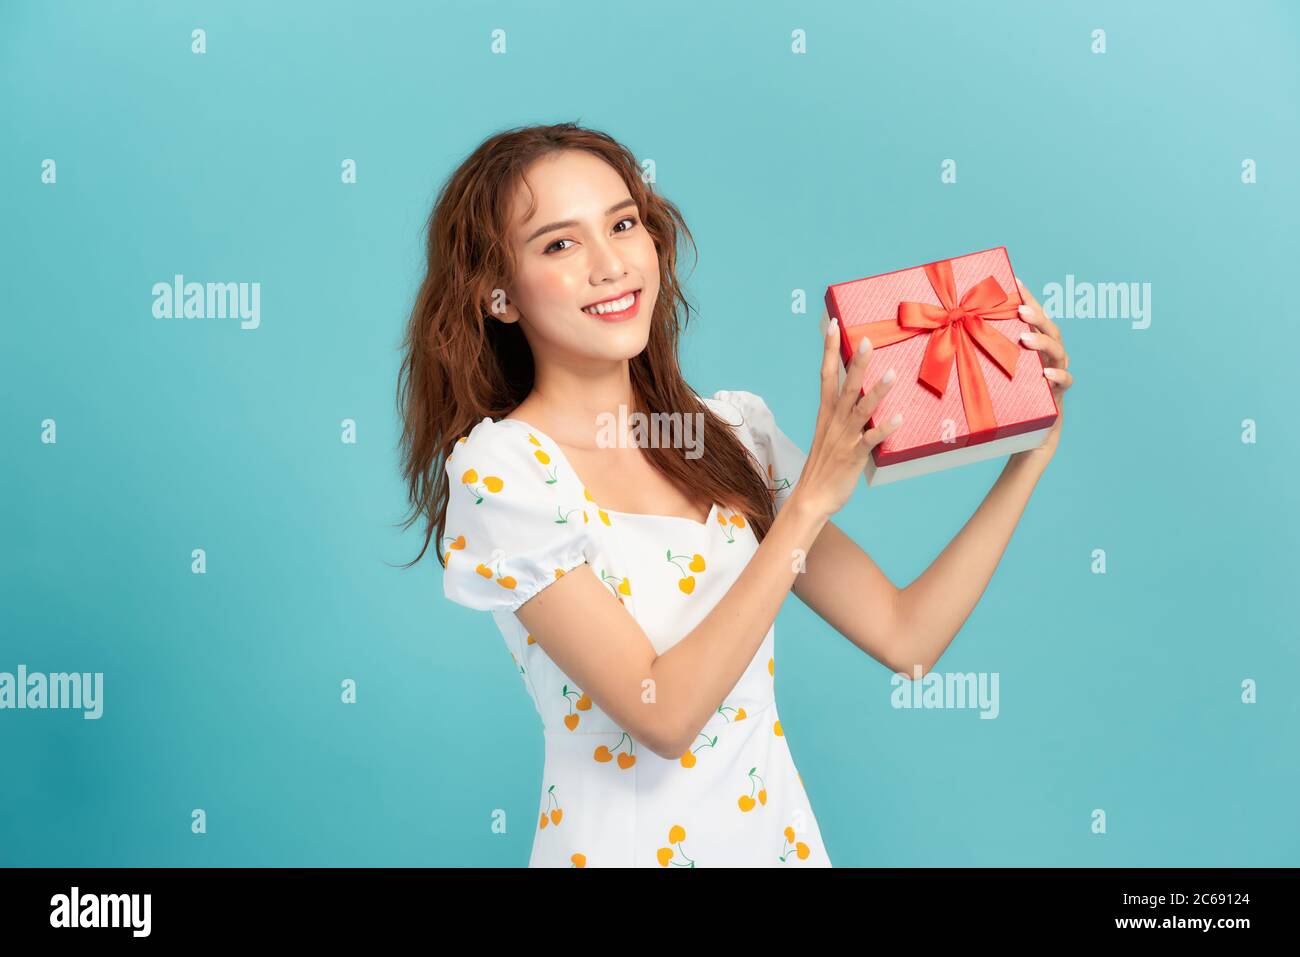 Happy smiling girl in dress holding present box and  over blue background Stock Photo